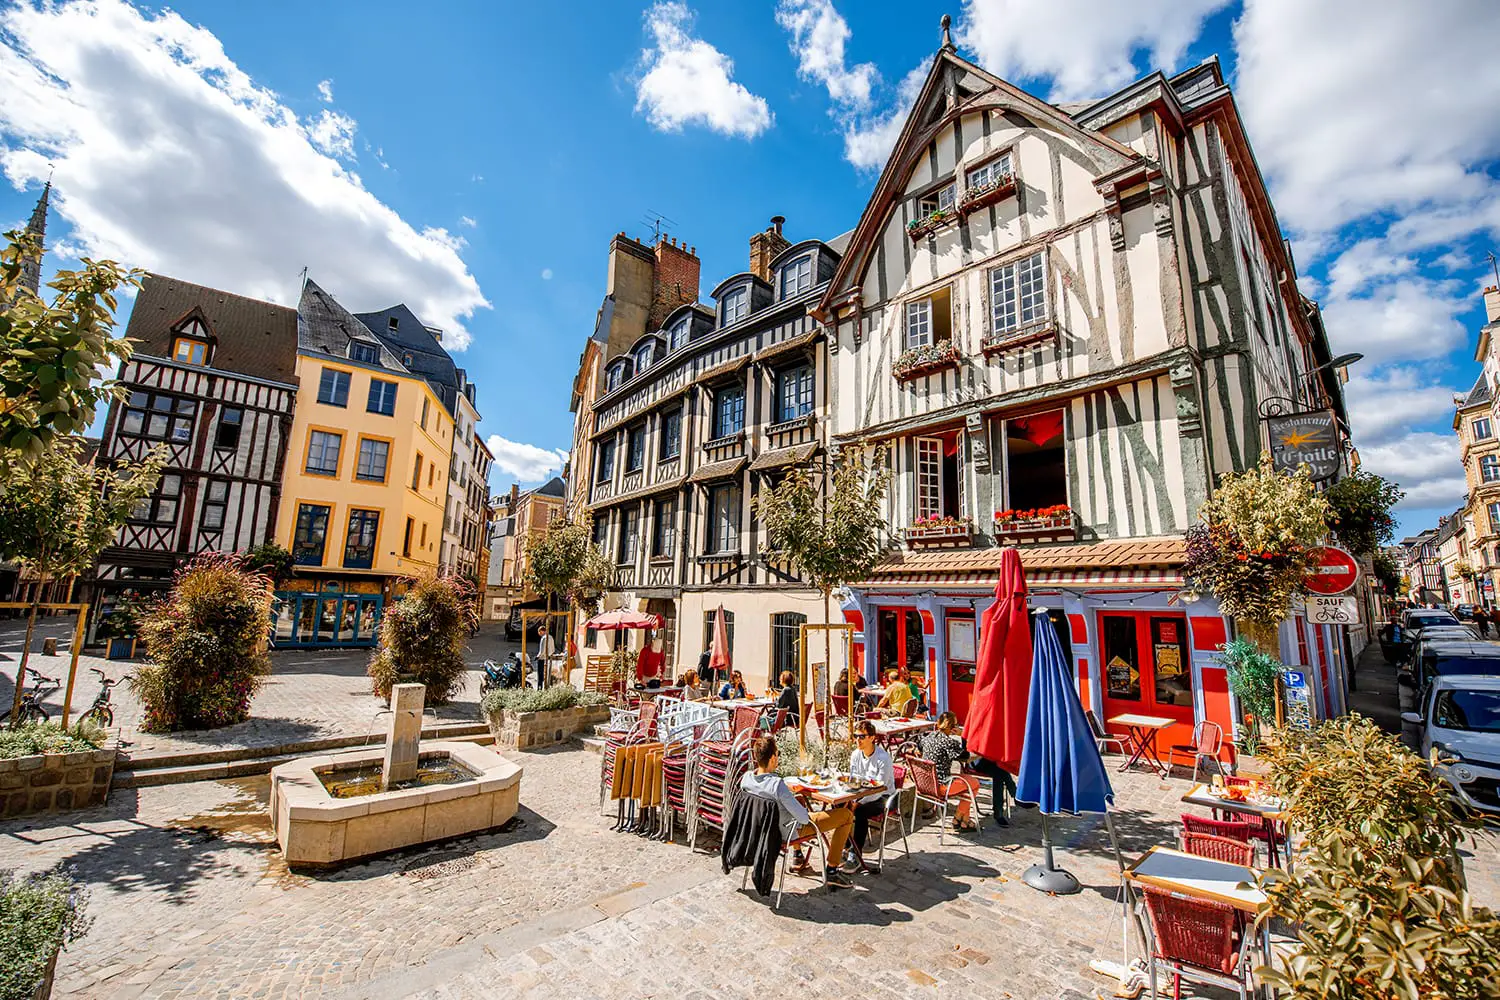 Street view with beautiful half-timbered houses in the old town of Rouen city, the capital of Nrmandy region in France